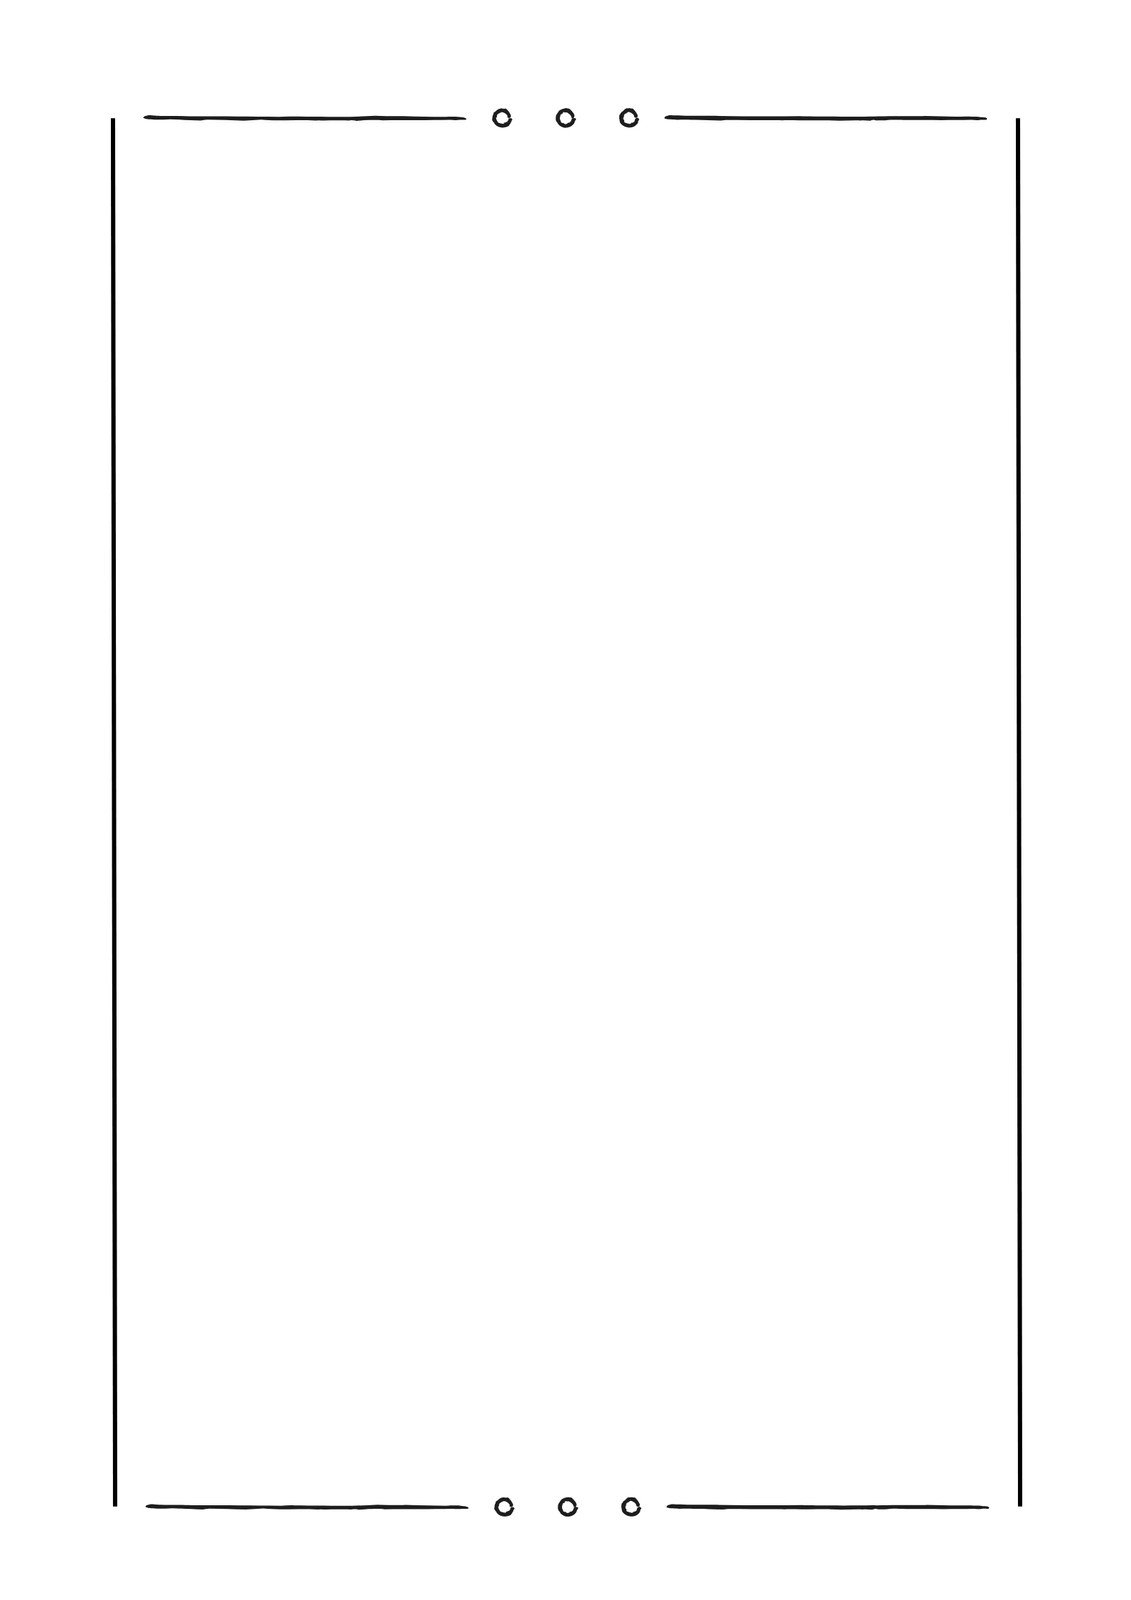 Simple Border Stationery Paper A4 Document